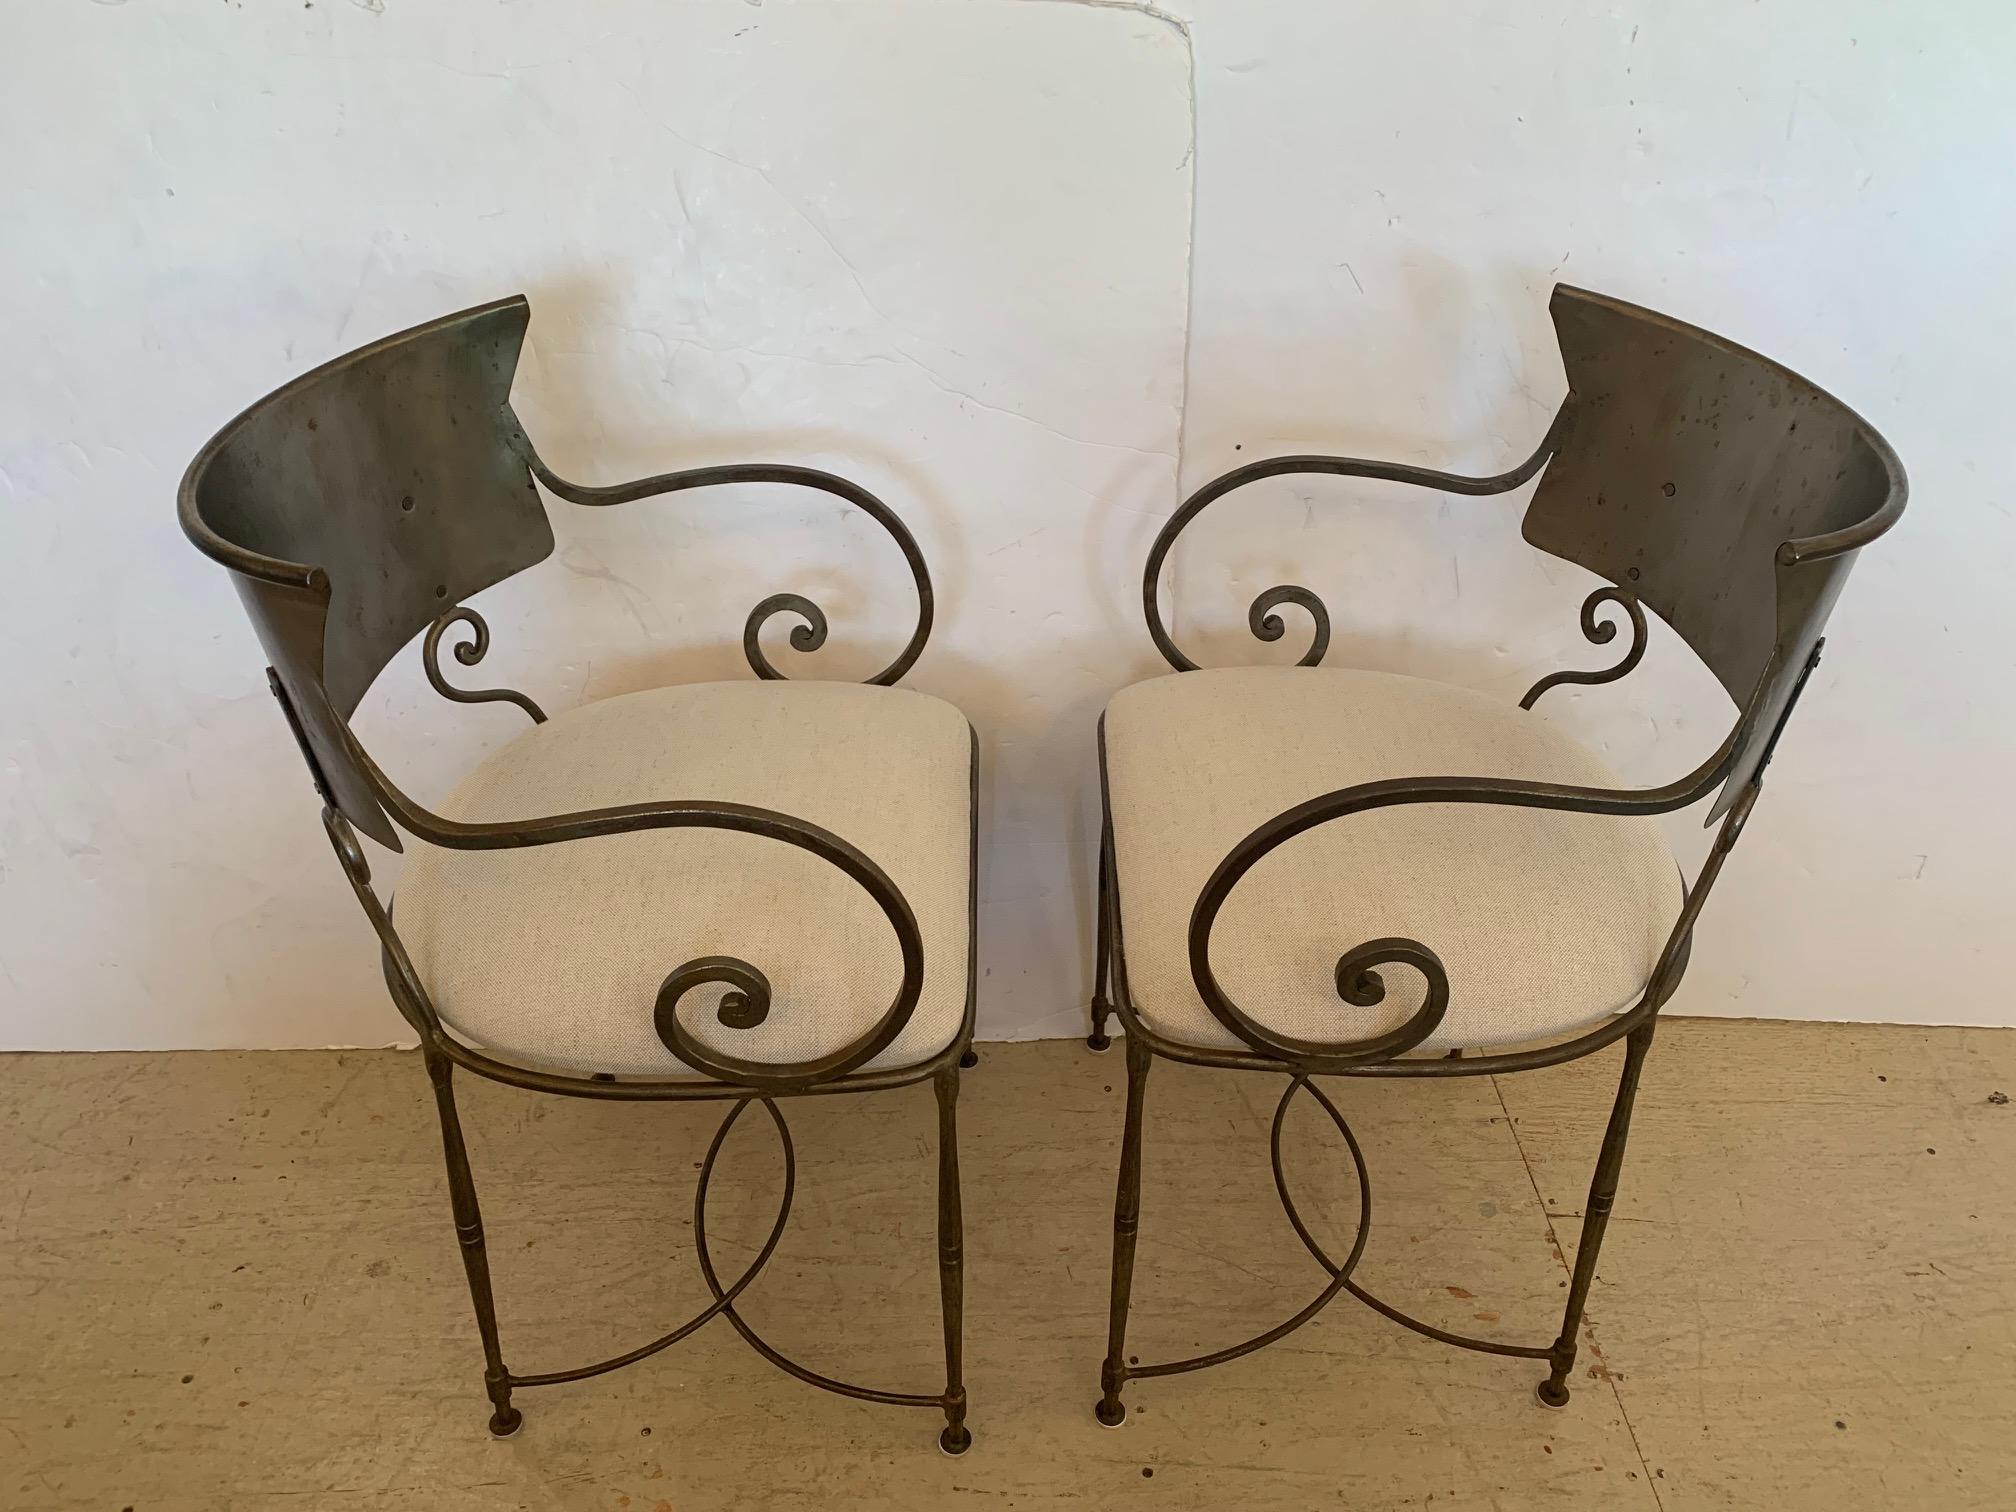 Pair of sophisticated contemporary vintage metal chairs with 
new upholstery.

Measures: rm. 26.25” H
Seat 16” D x 18.5” H.